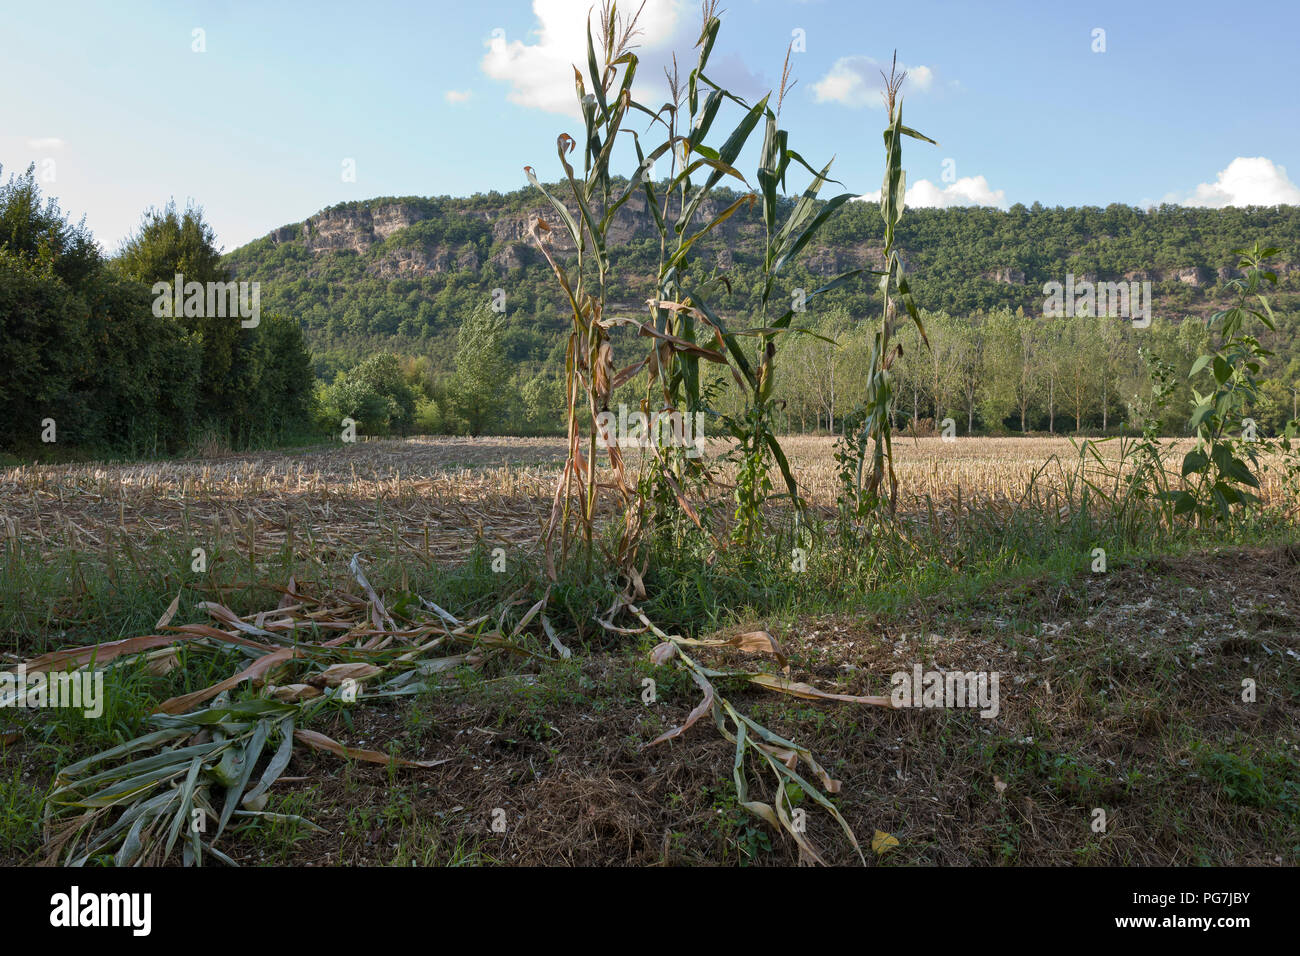 Uncut maize left growing after harvesting during a drought in Lexos, part of the commune of  Varen, Tarn et Garonne, Occitanie, France ,Europe Stock Photo